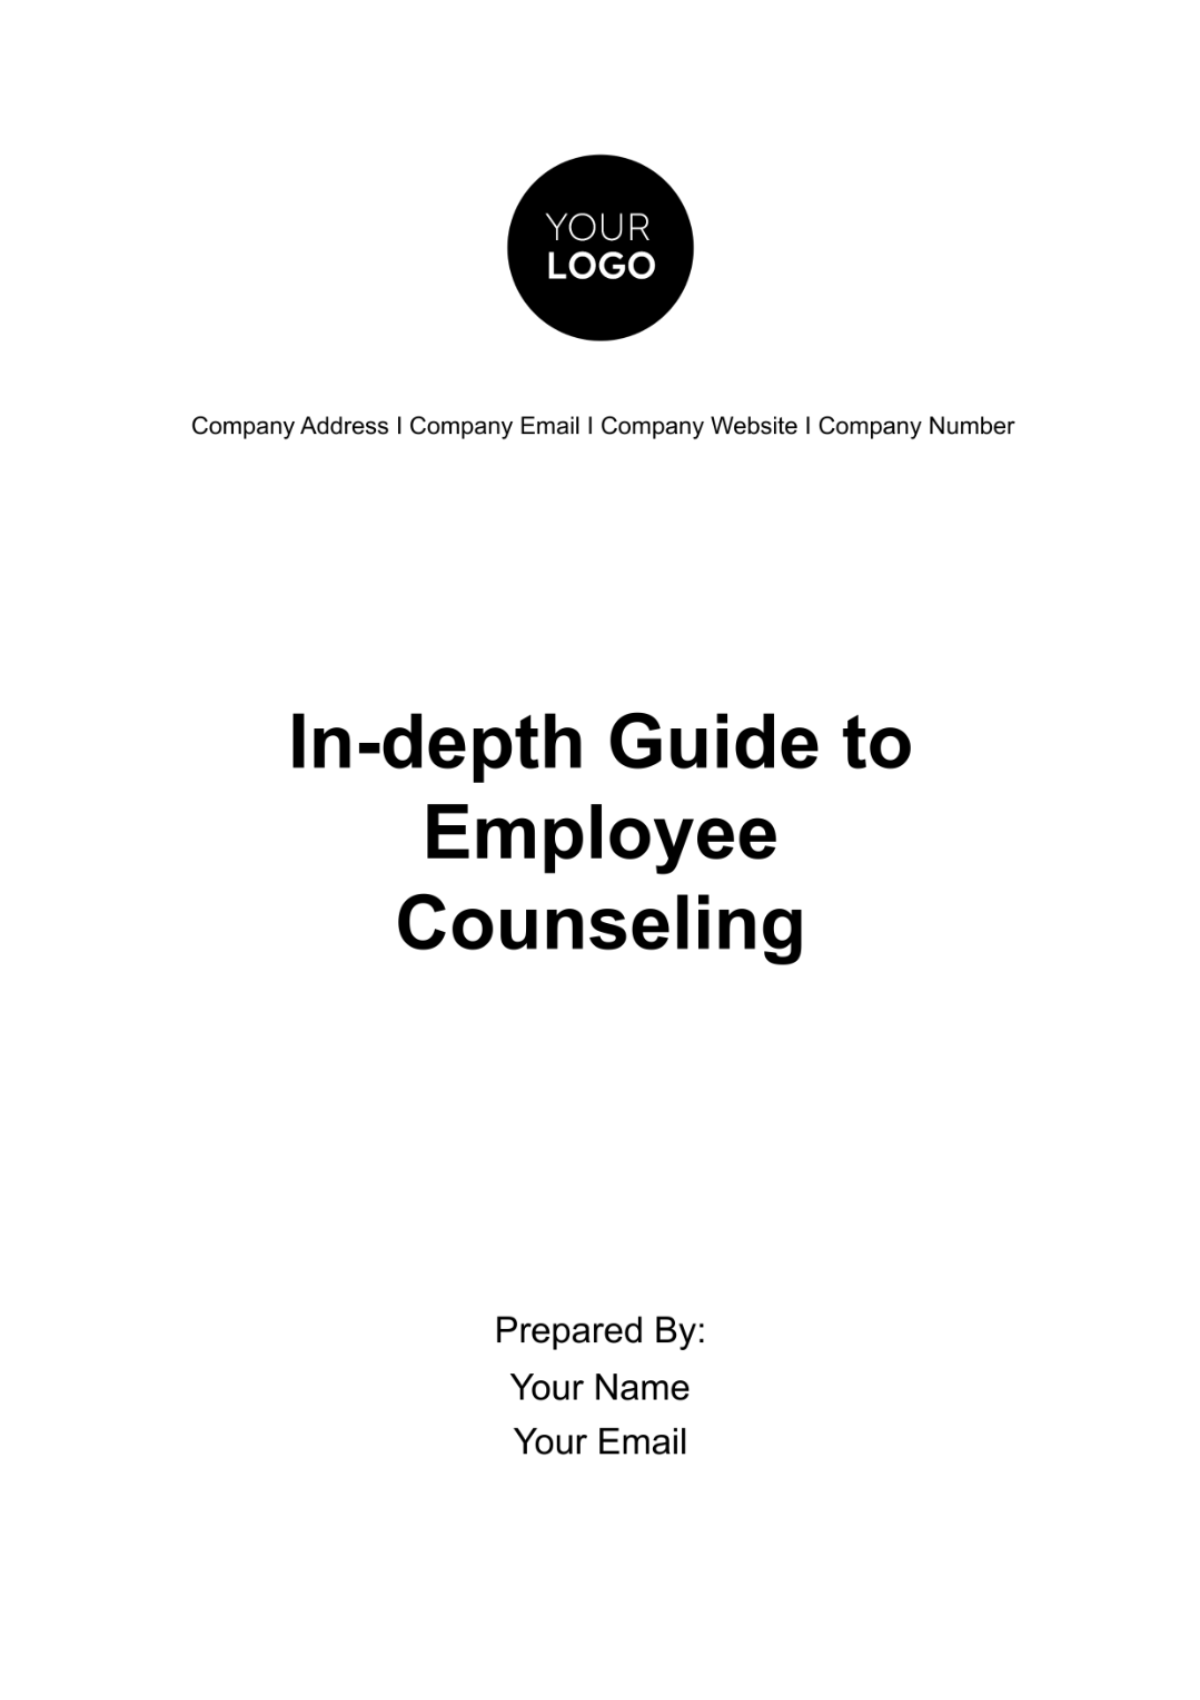 Free In-depth Guide to Employee Counseling HR Template